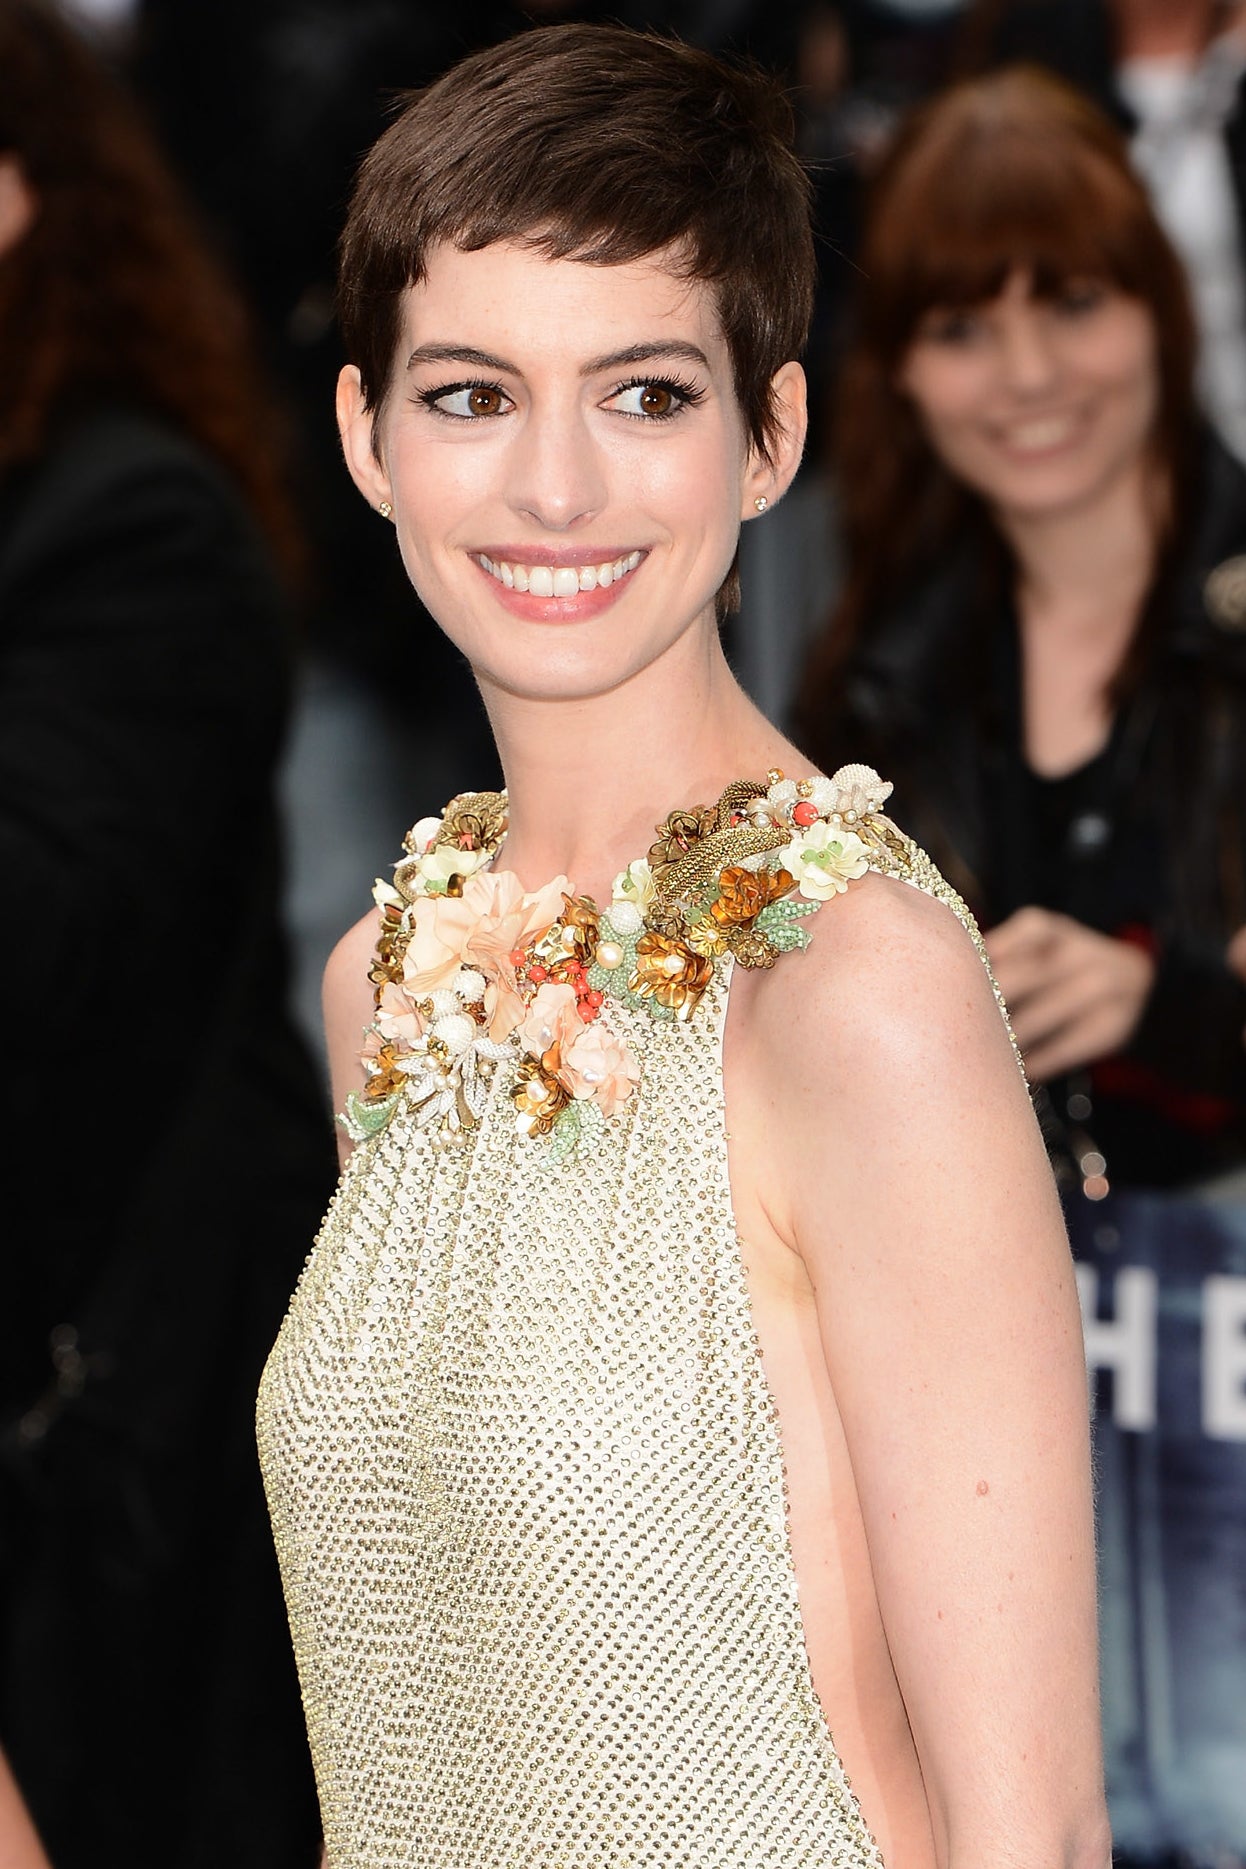 Anne Hathaway on the red carpet